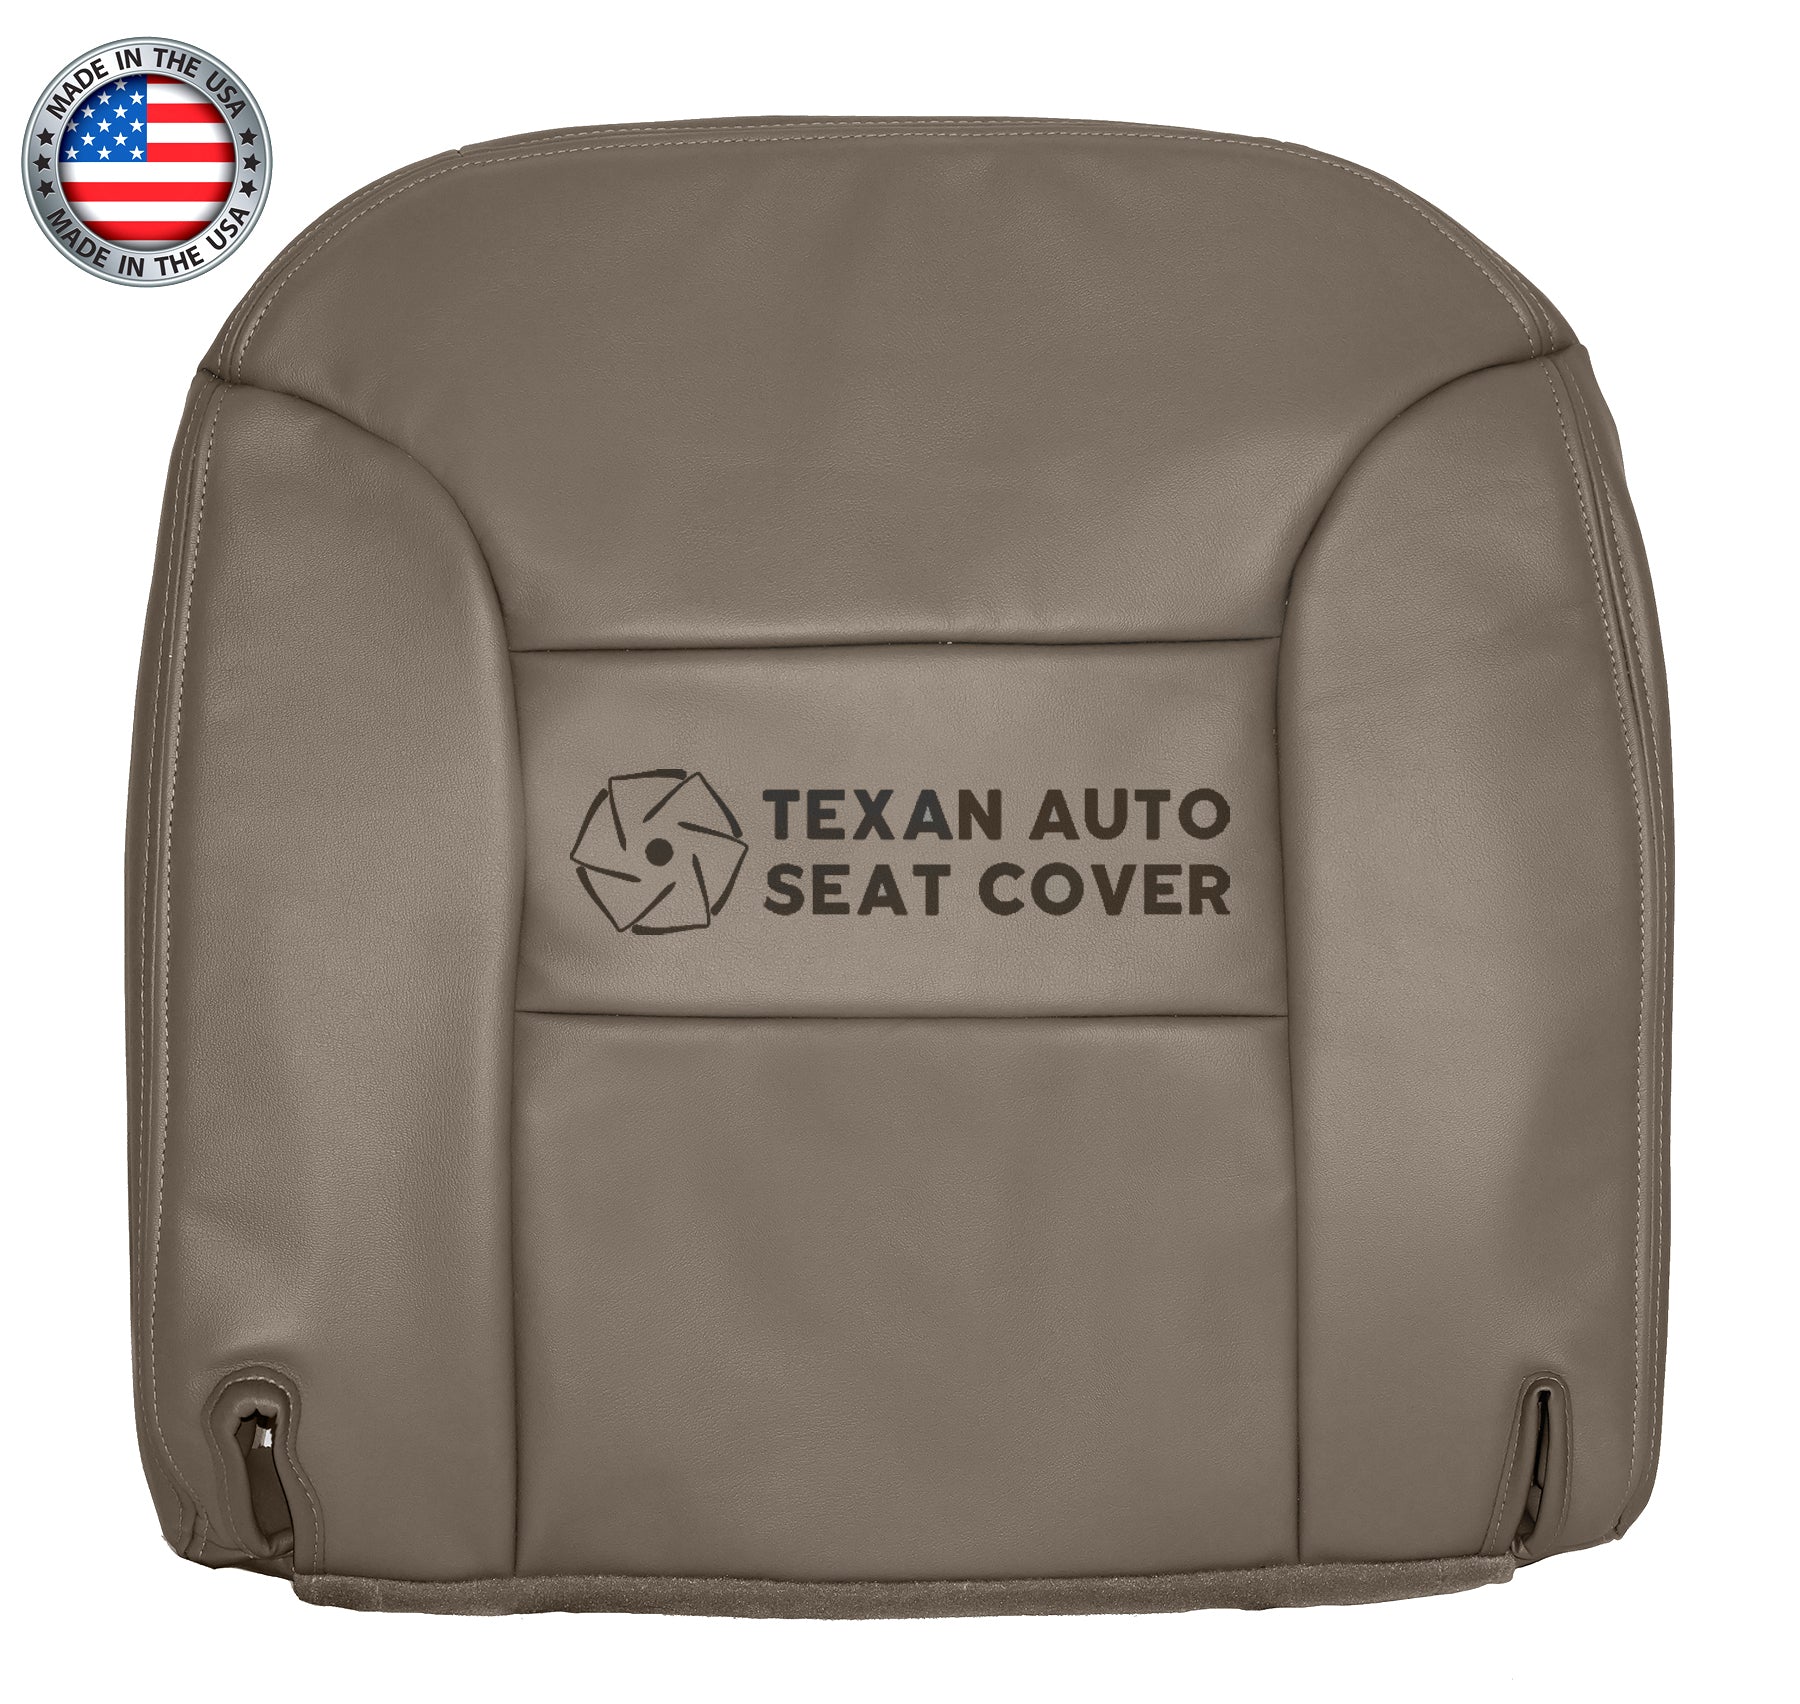 1995, 1996, 1997, 1998, 1999 Chevy Tahoe Suburban 1500 2500 LT LS 2WD, 4X4 Passenger Side Bottom Synthetic Leather Replacement Cover Tan